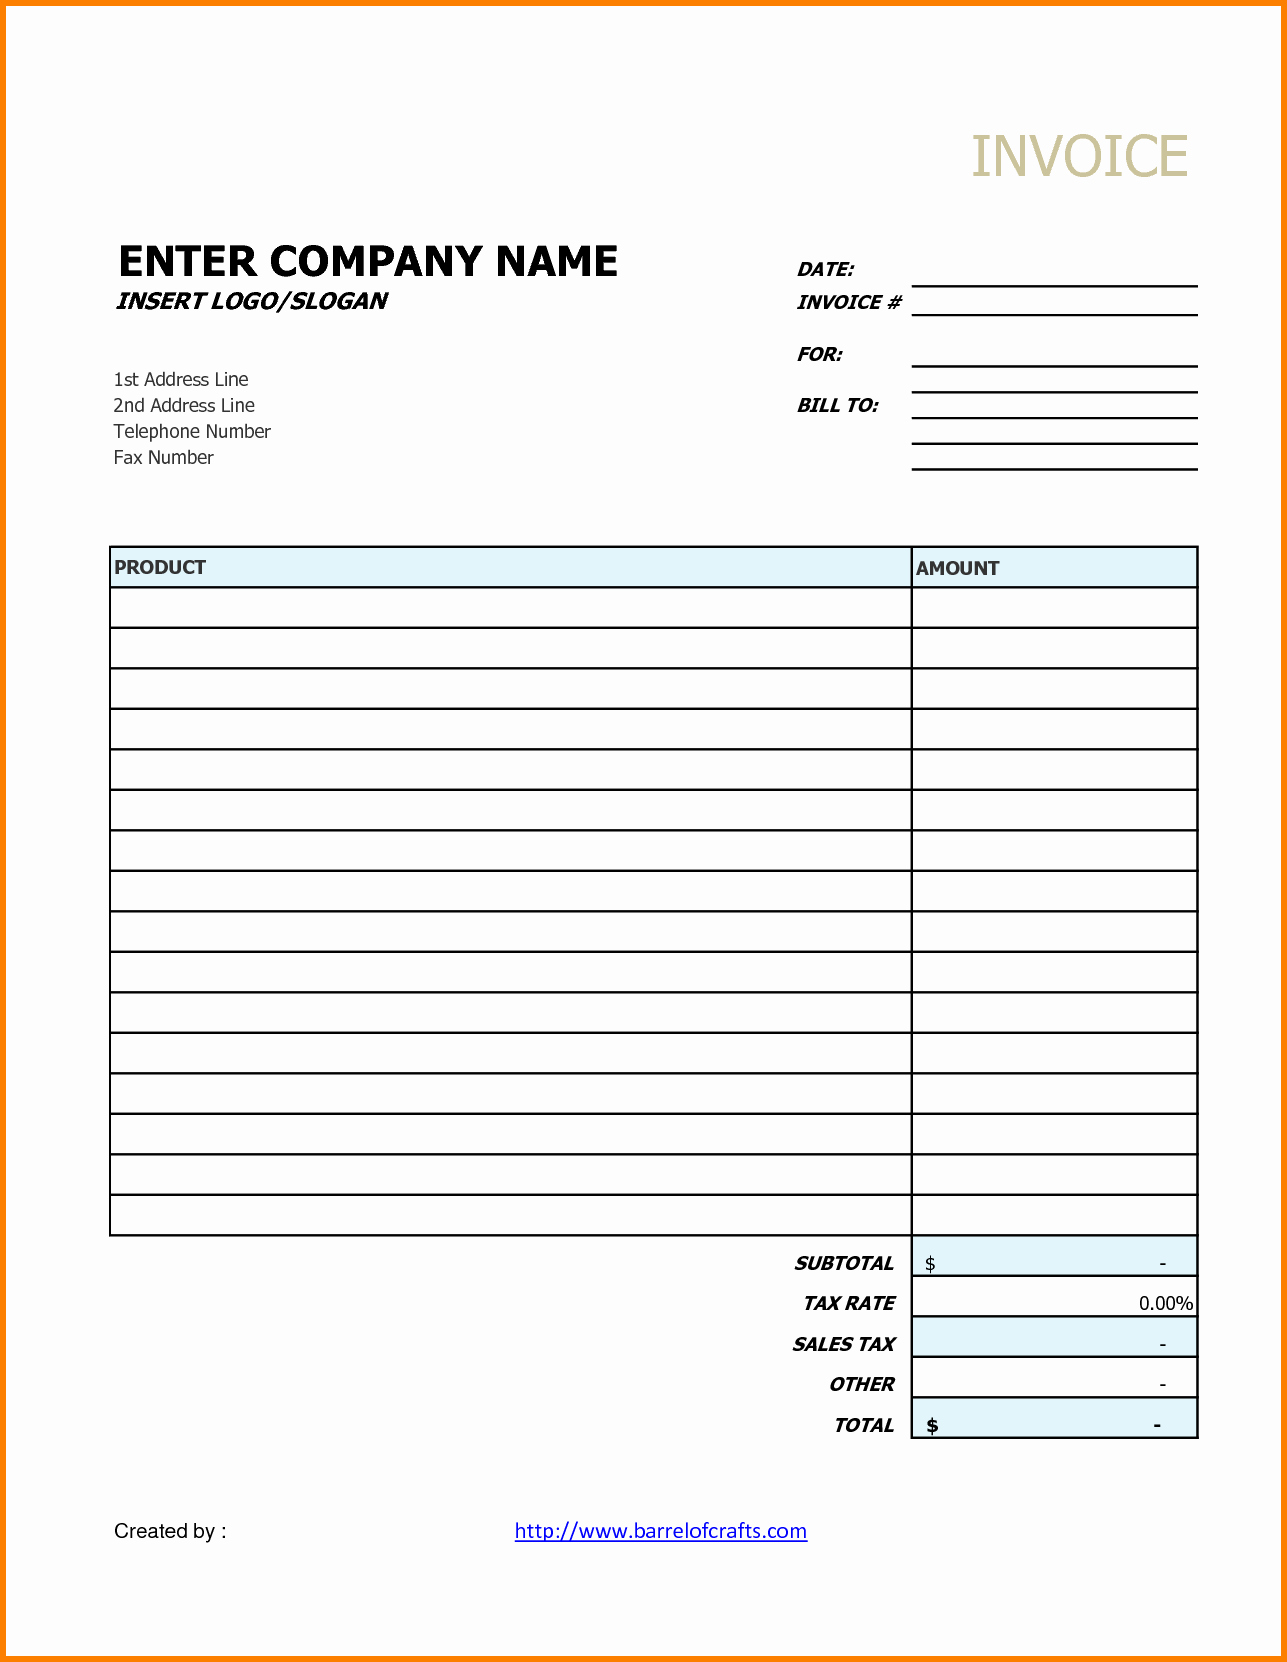 Invoice and Receipt Template Lovely Generic Invoice